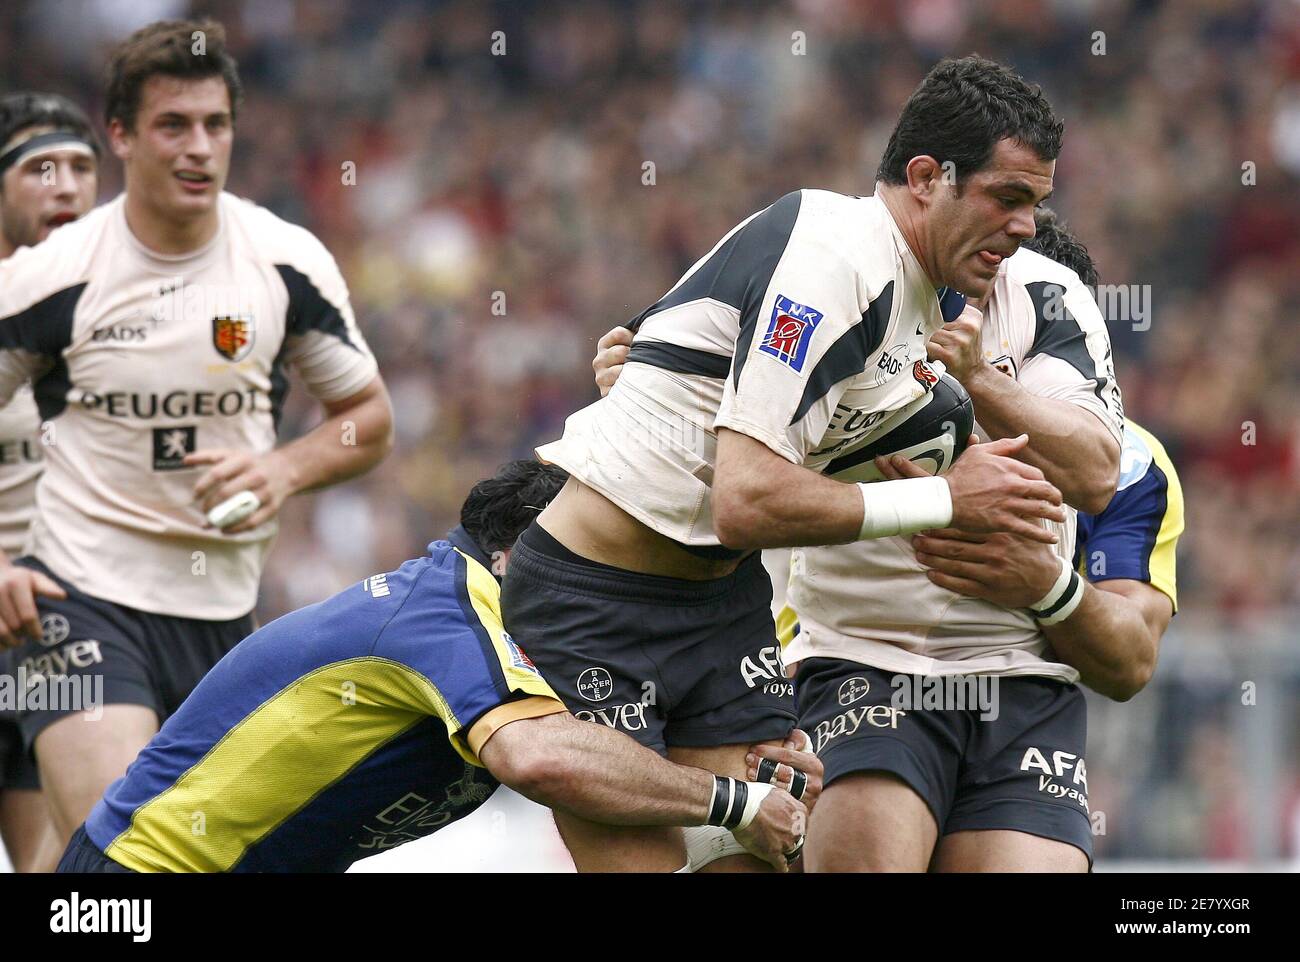 Stade Toulousain's Gregory Lamboley during the top 14, Stade Toulousain vs ASM  Clermont Toulouse, France on April 15, 2007. Stade Toulousain won 24-7.  Photo by Christian Liewig/ABACAPRESS.COM Stock Photo - Alamy